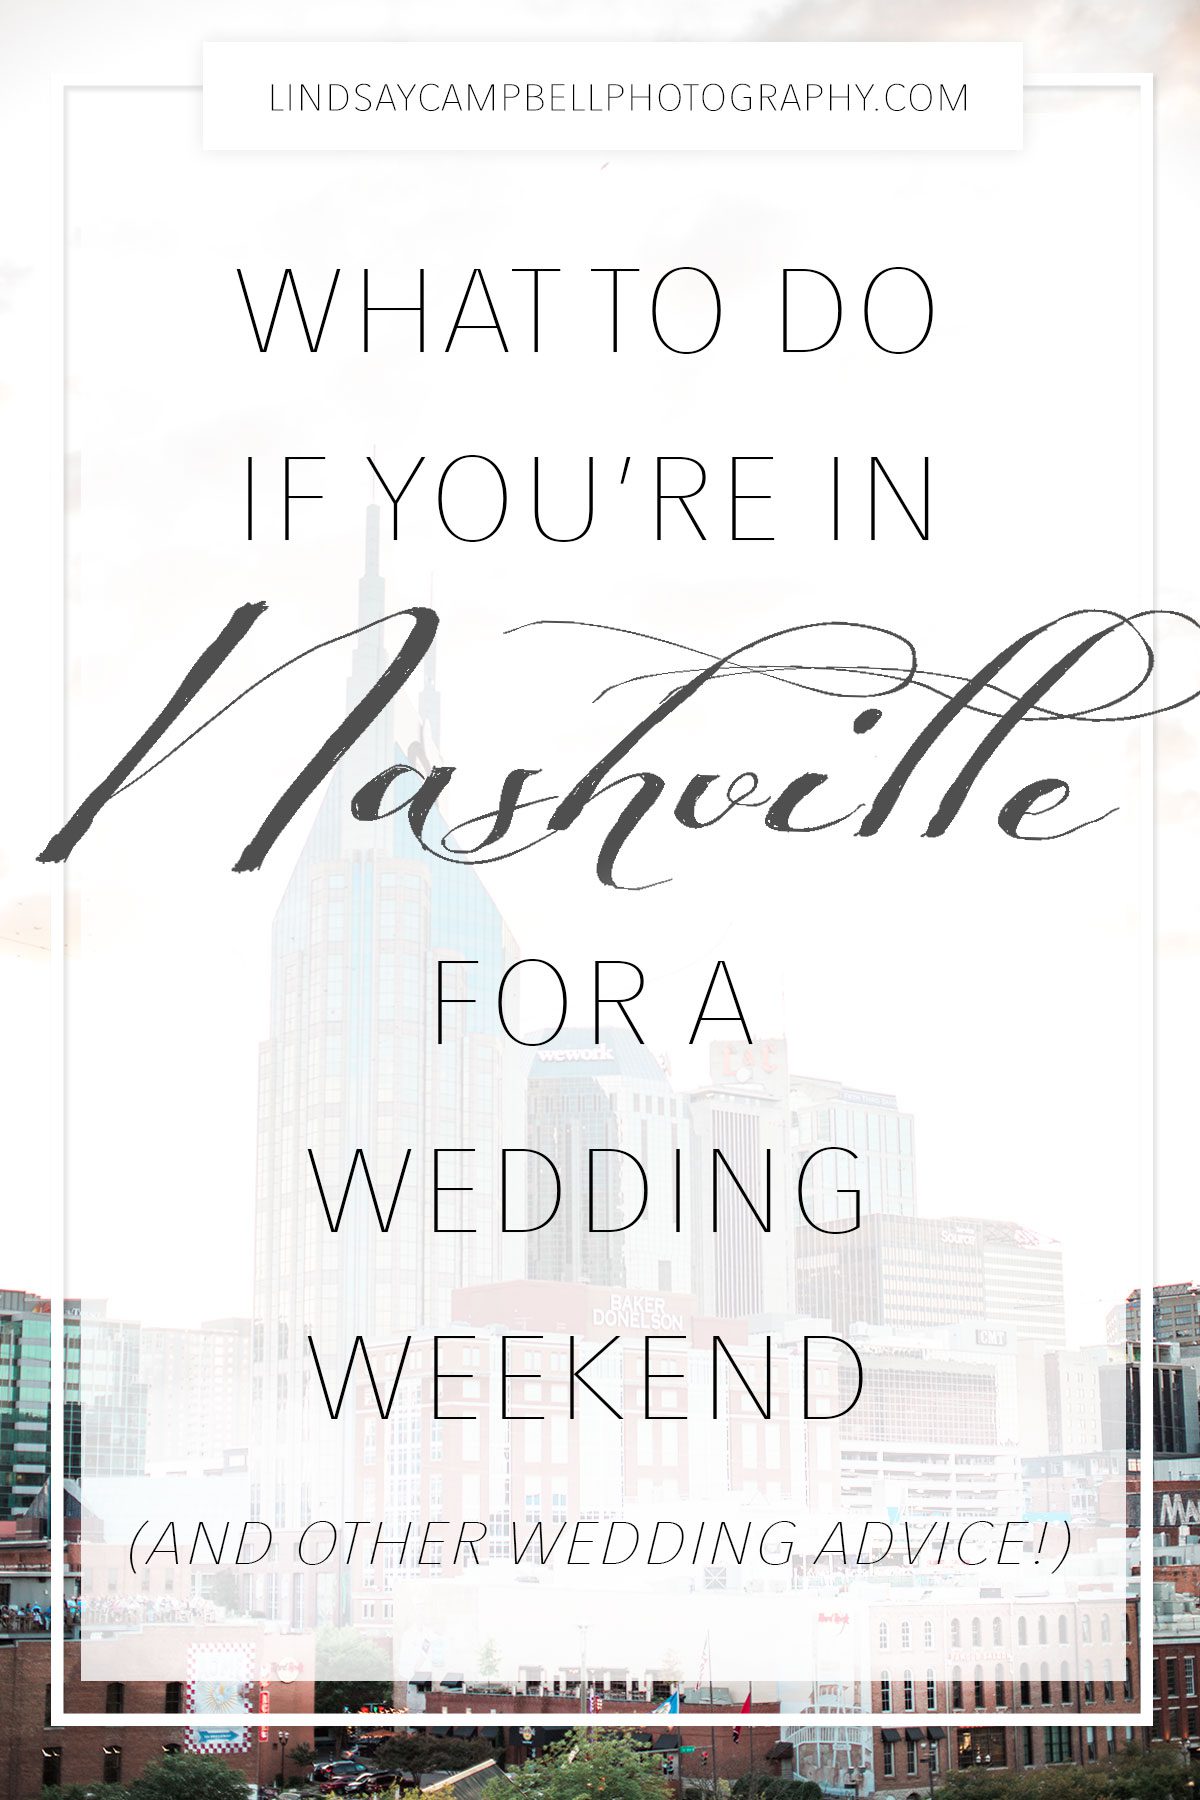 nashville-wedding-weekend What to Do if You're in Nashville for a Wedding